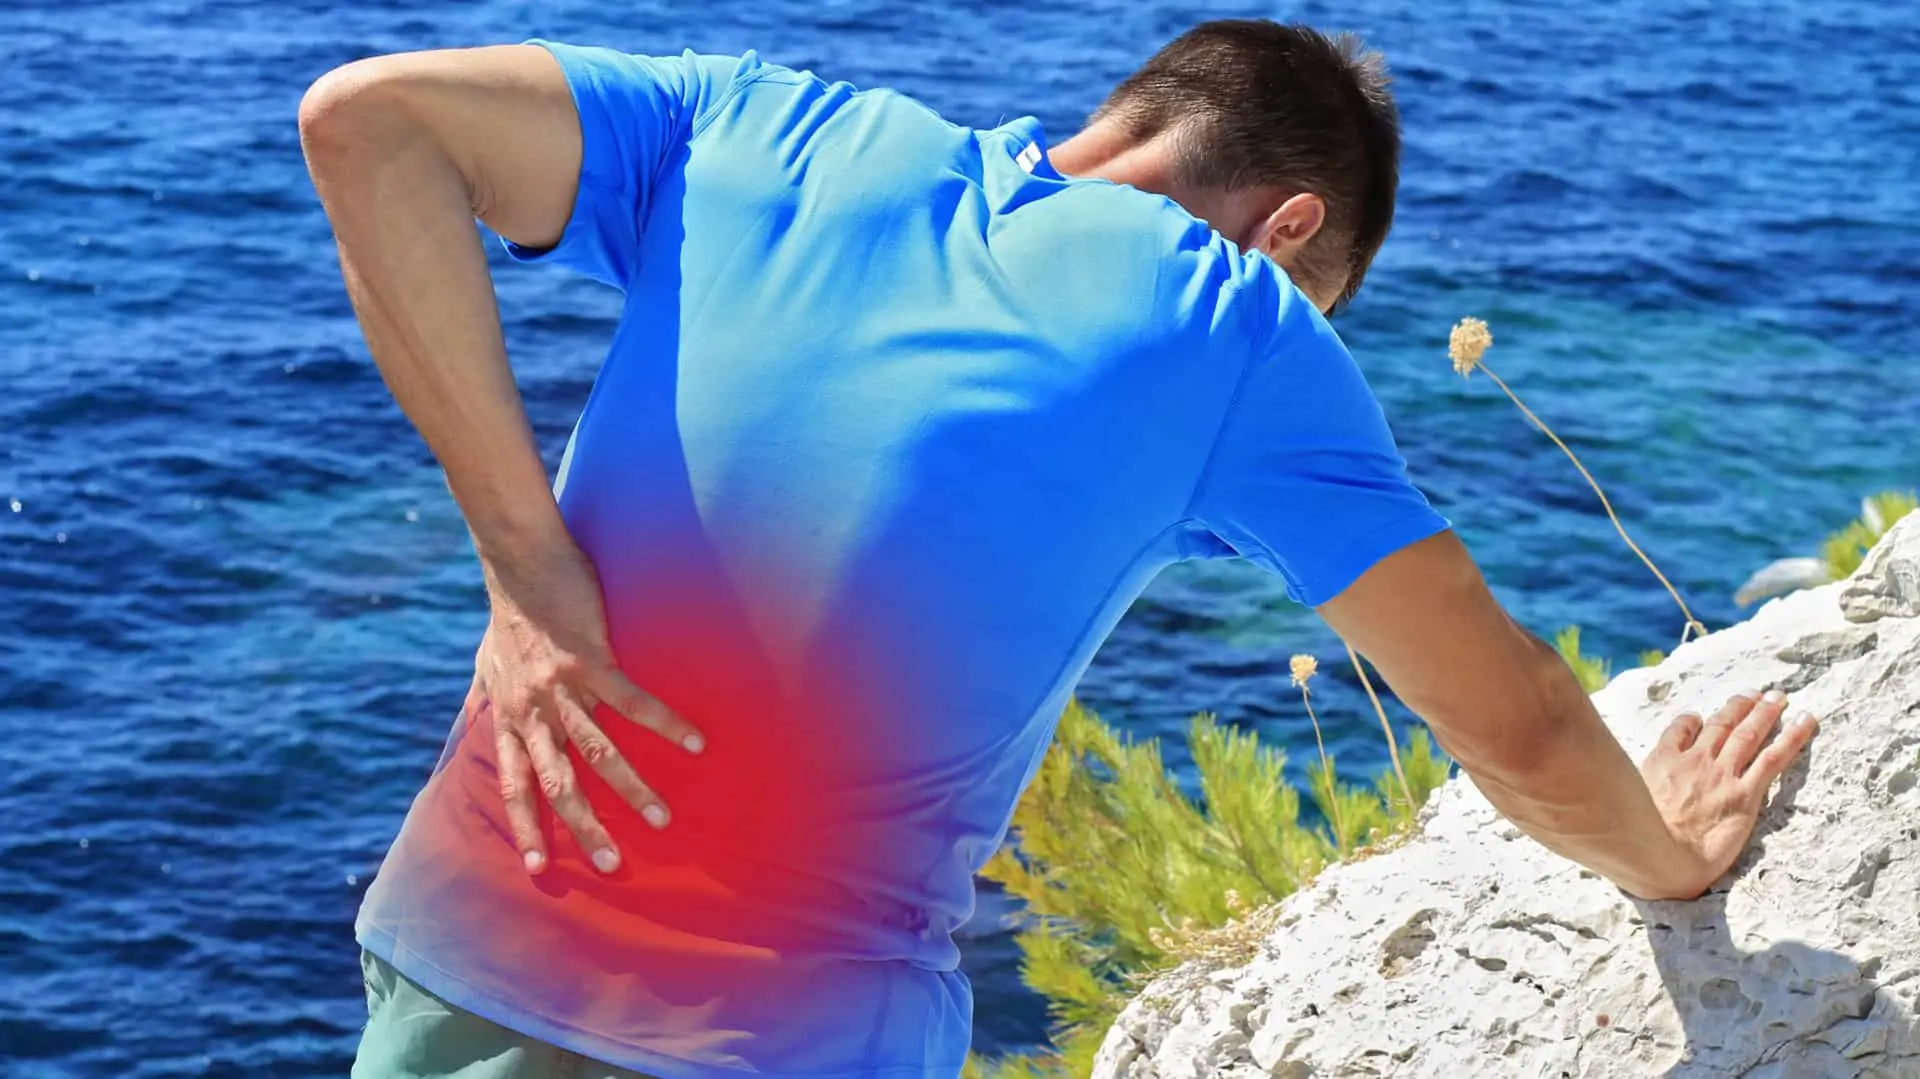 Man with back pain. Sport injury